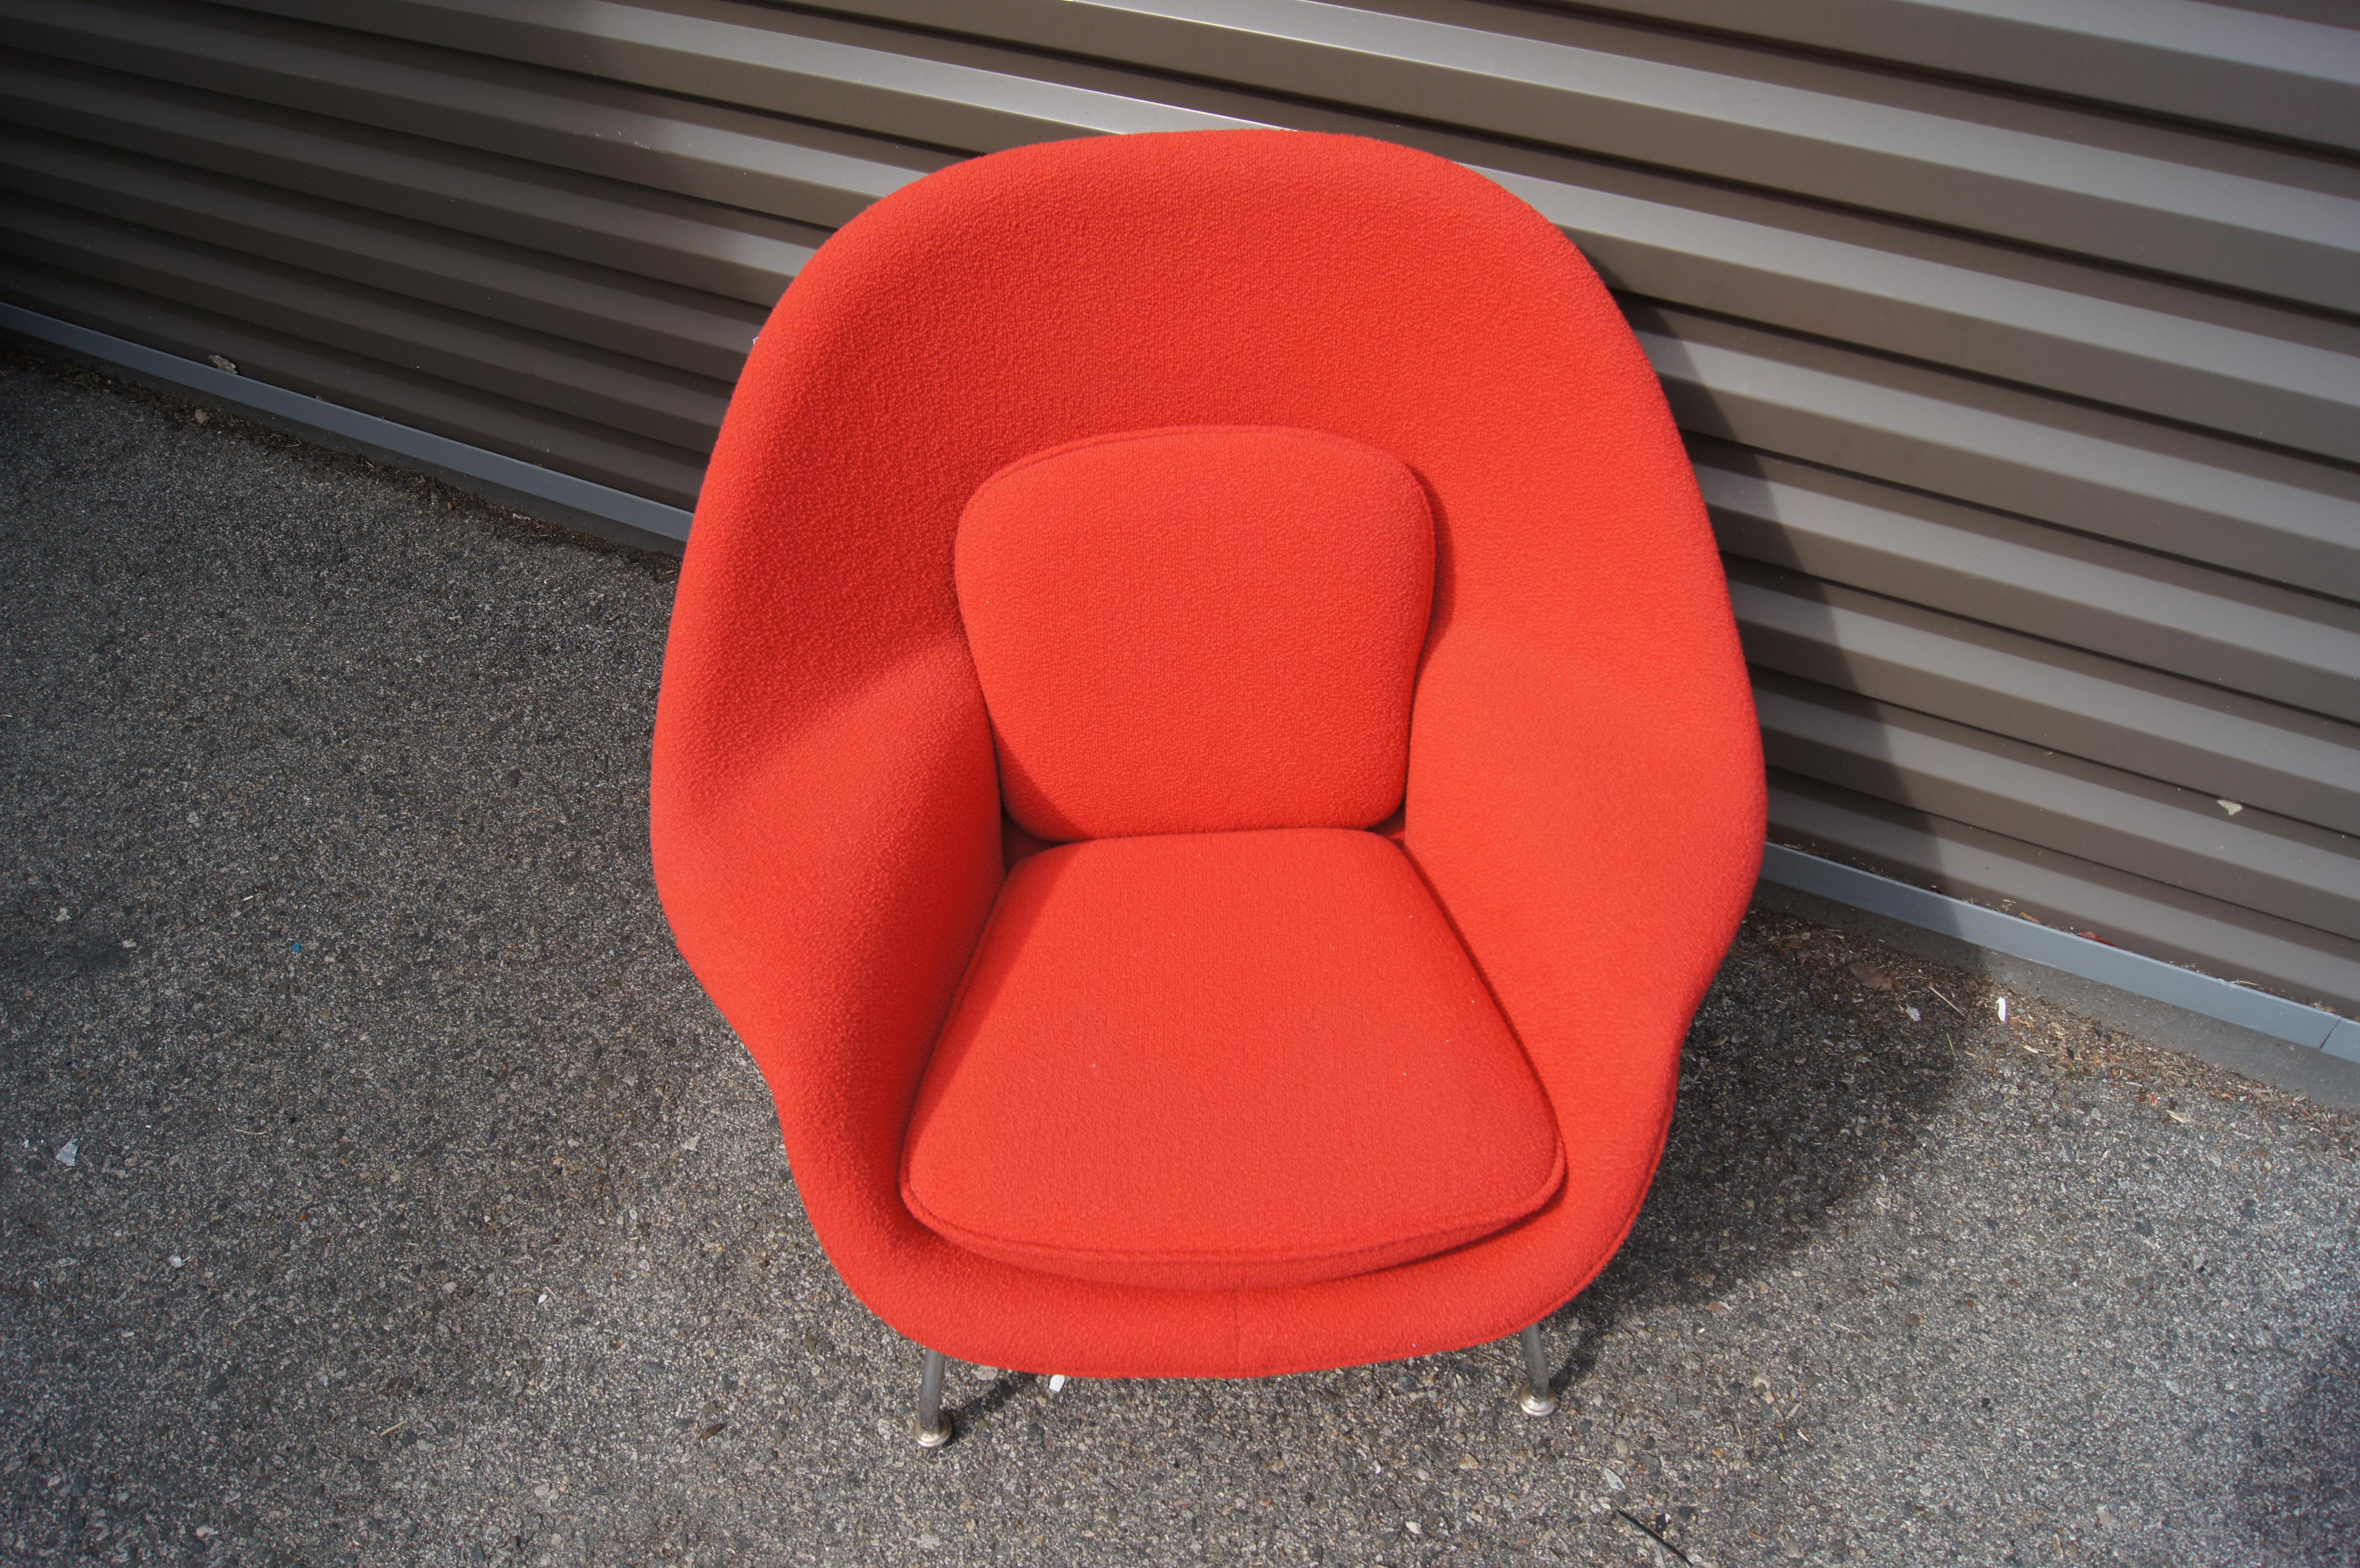 American Child's Womb Chair by Eero Saarinen for Knoll